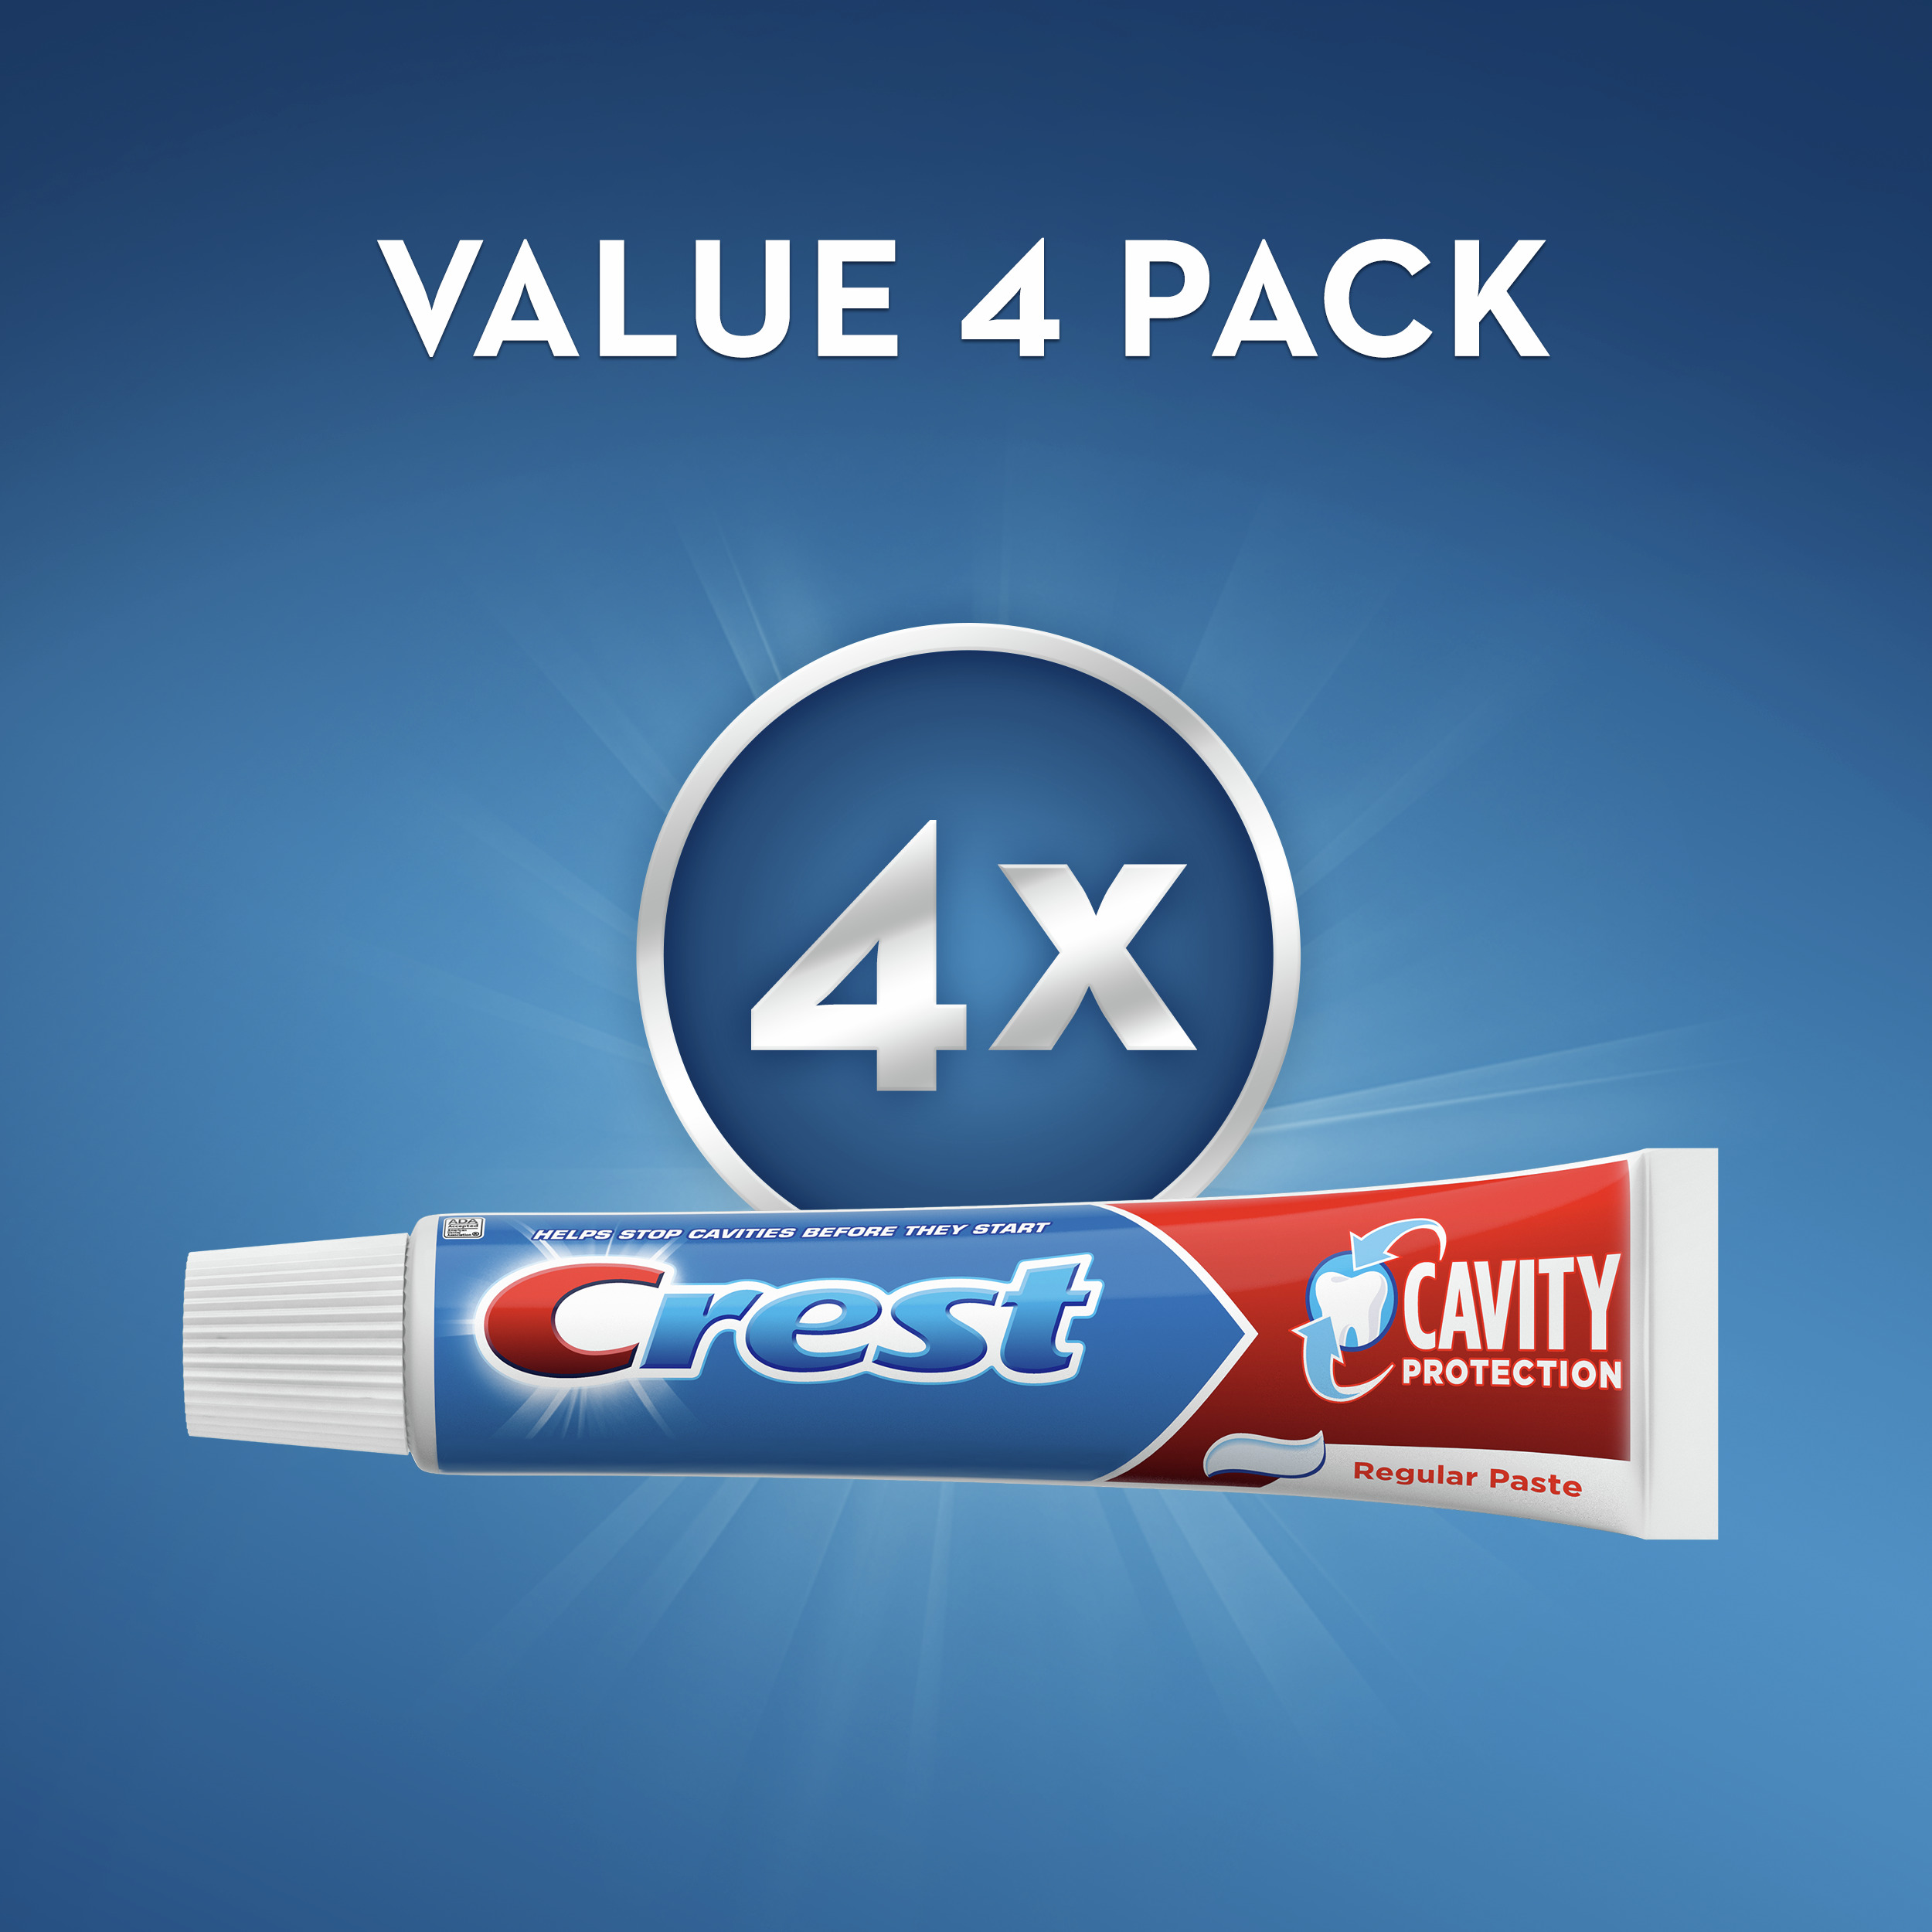 Crest Cavity Protection Toothpaste, Regular Paste, 5.7 oz, Pack of 4 - image 7 of 8